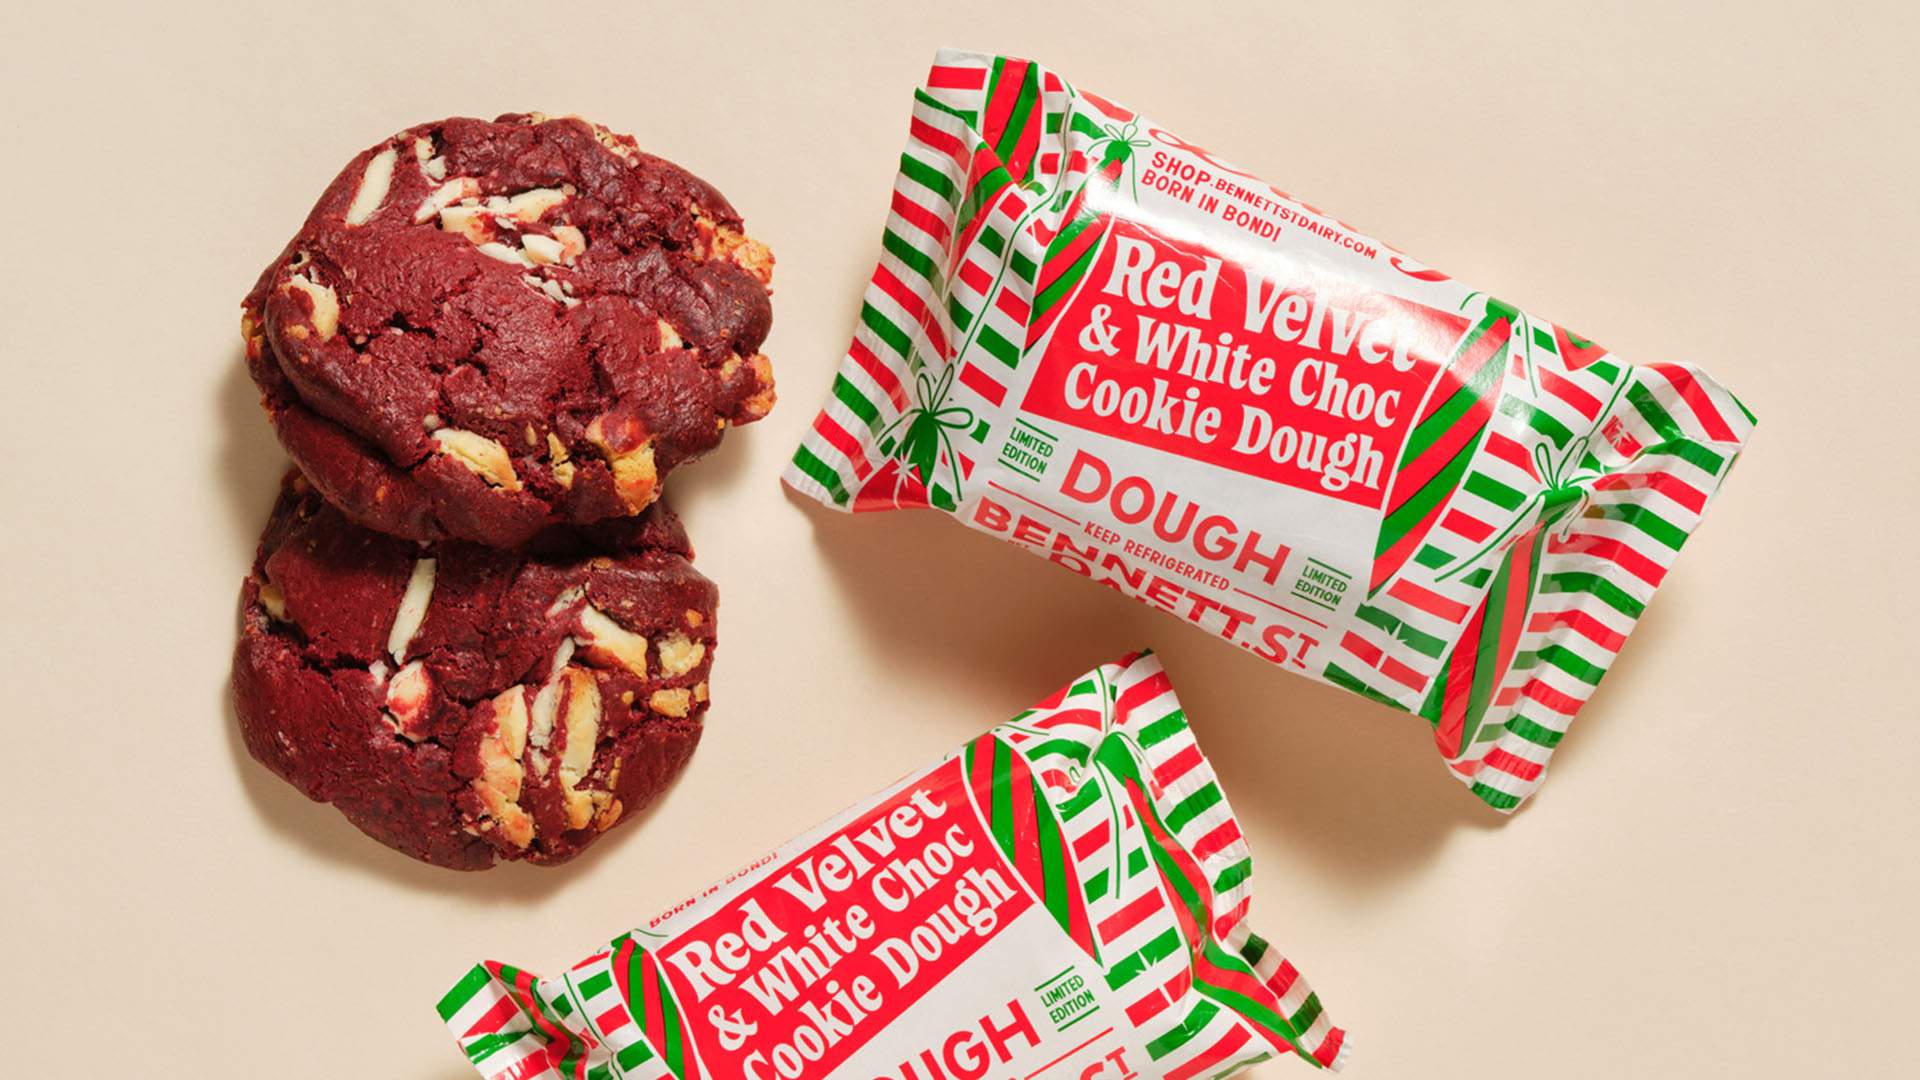 Bennett St Dairy Is Doing Supremely Festive Red Velvet and White Chocolate Cookie Dough